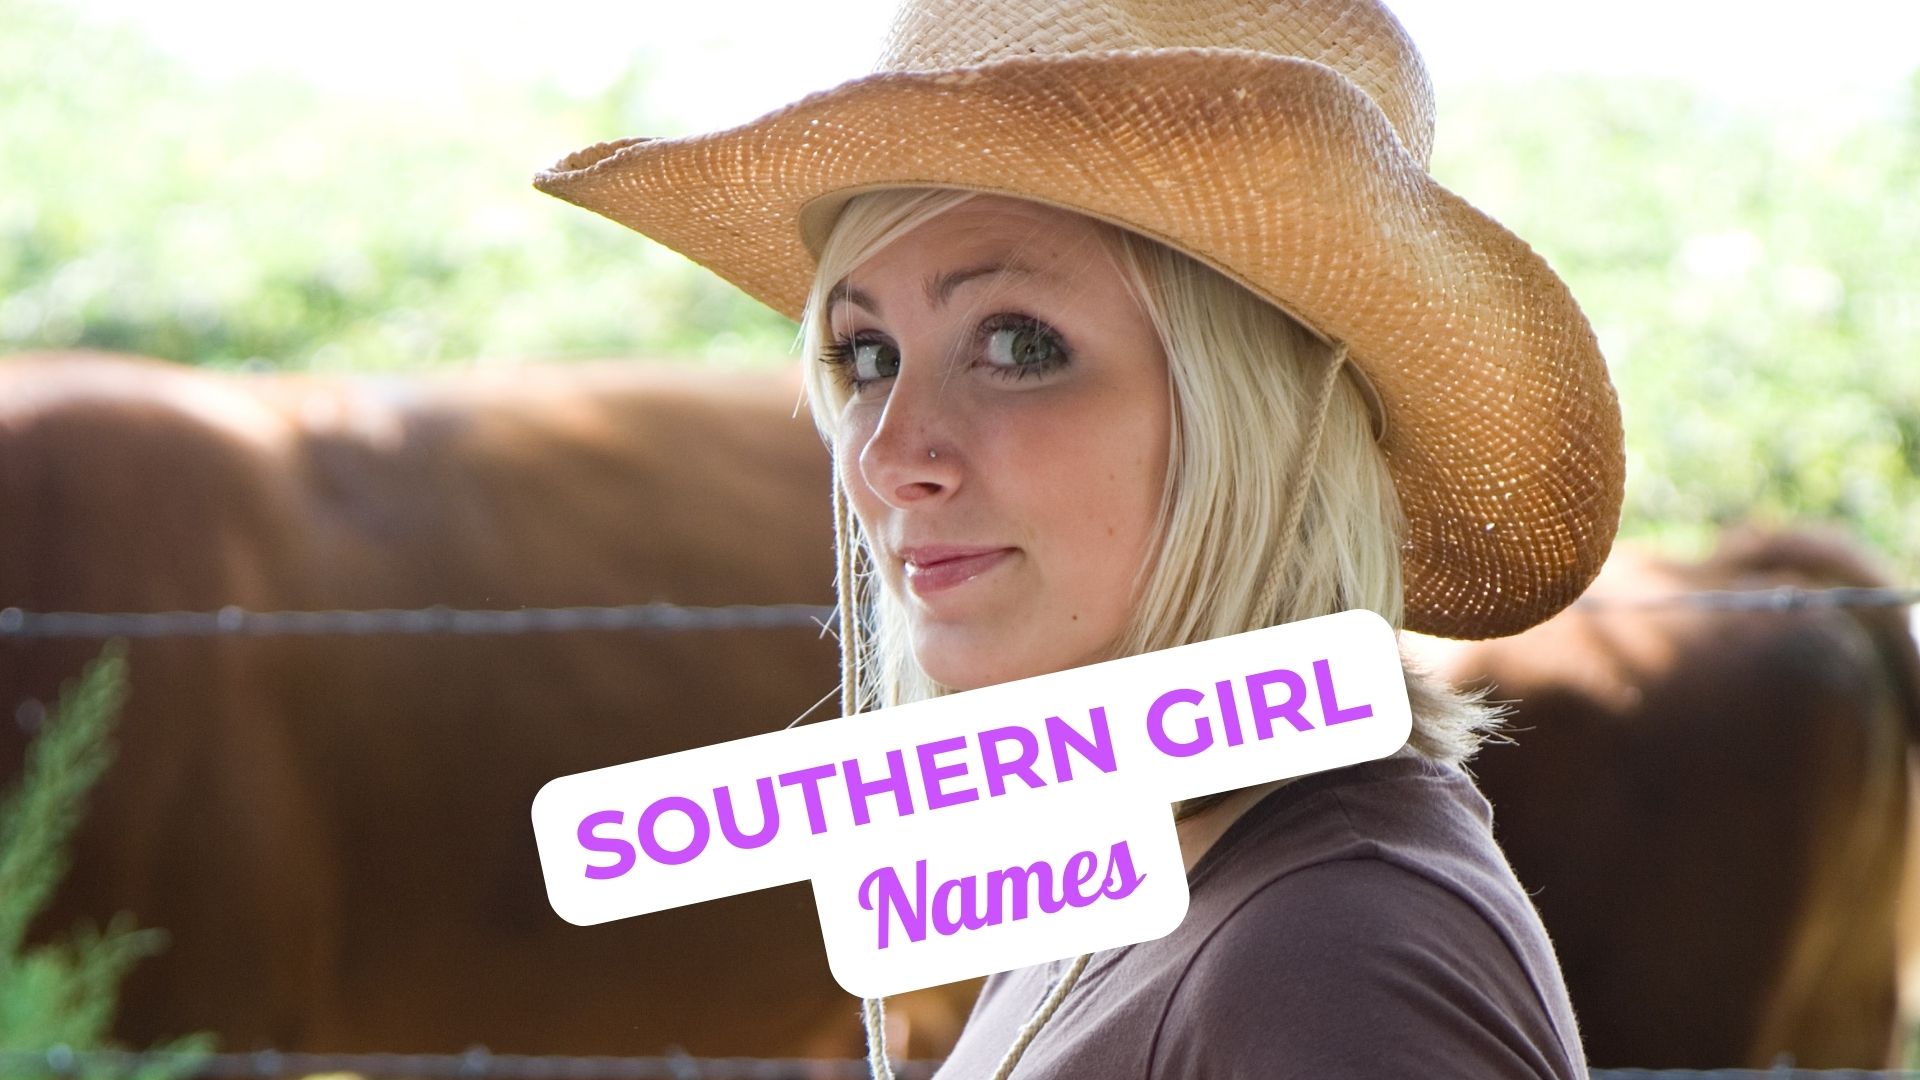 Charming Southern Girl Names to Consider